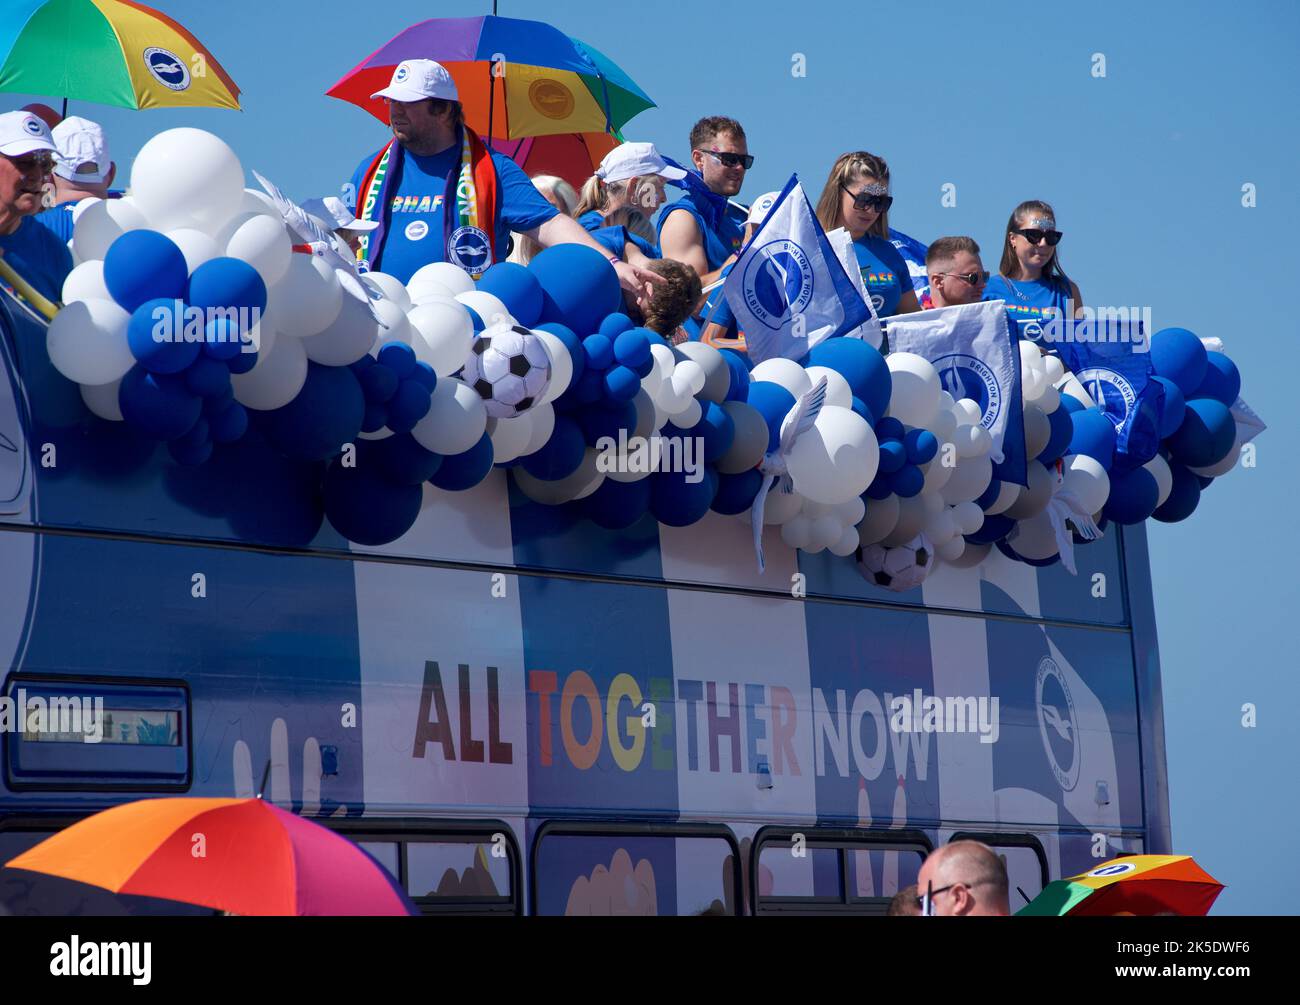 Brighton & Hove Pride Festival, Brighton & Hove, East Sussex, England. Brighton & Hove Albion Football Club's official Pride 'float' on board an open double-decker bus, decorated in team colours. Stock Photo